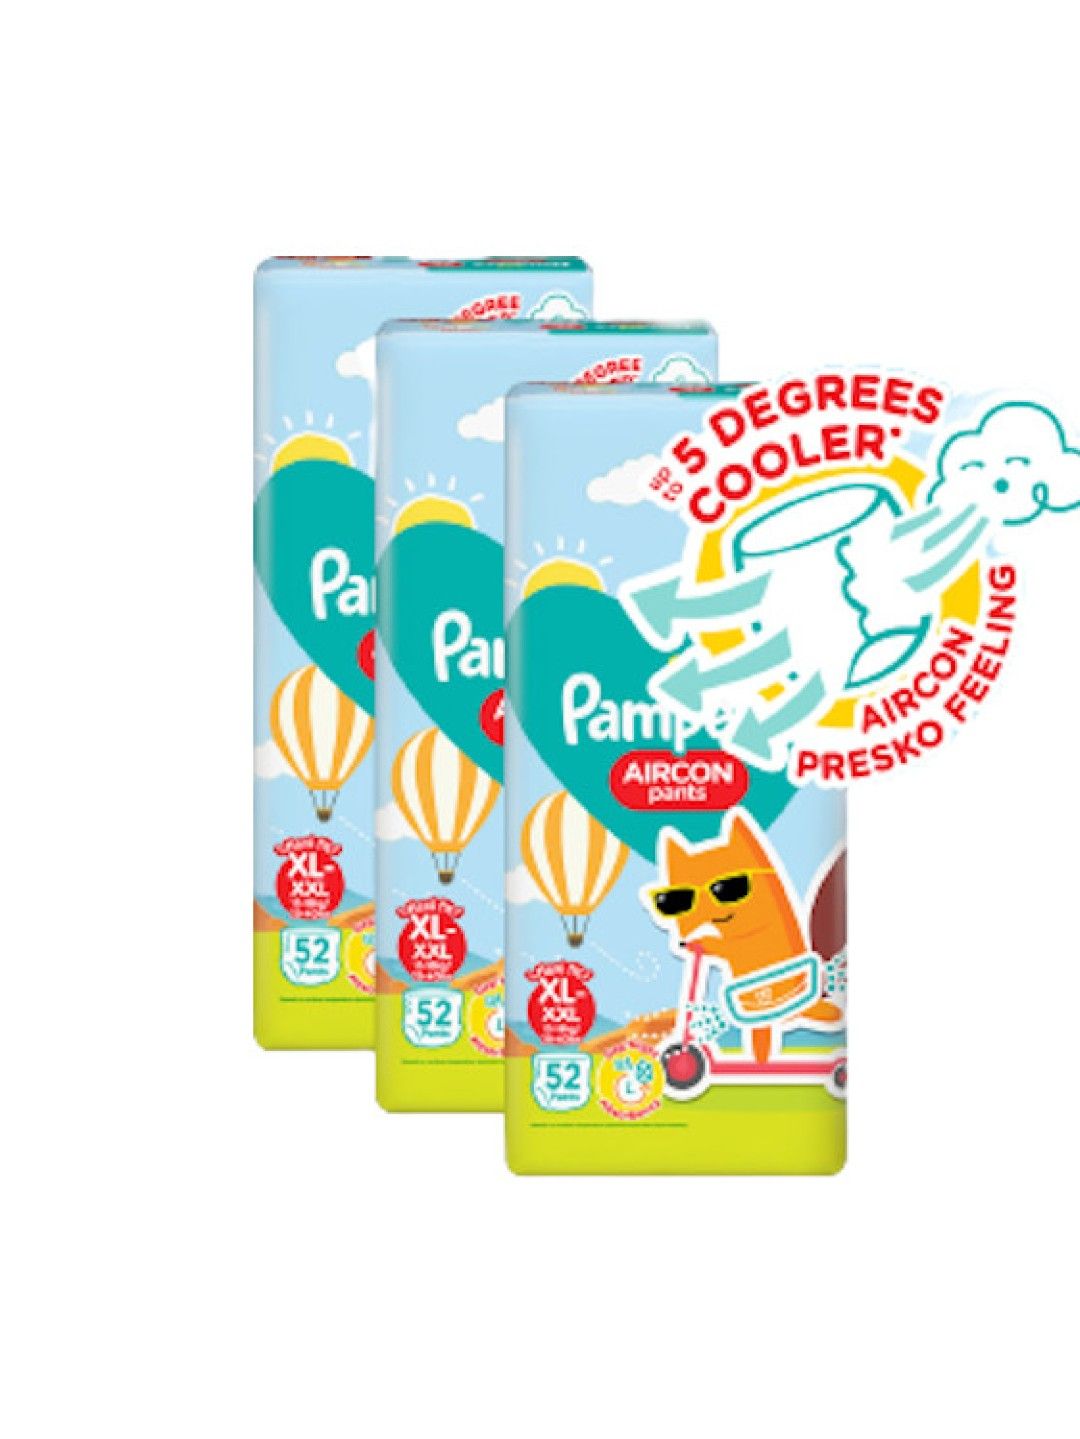 Pampers Aircon Pants Diapers XL 52s x 3 packs (156 pcs)